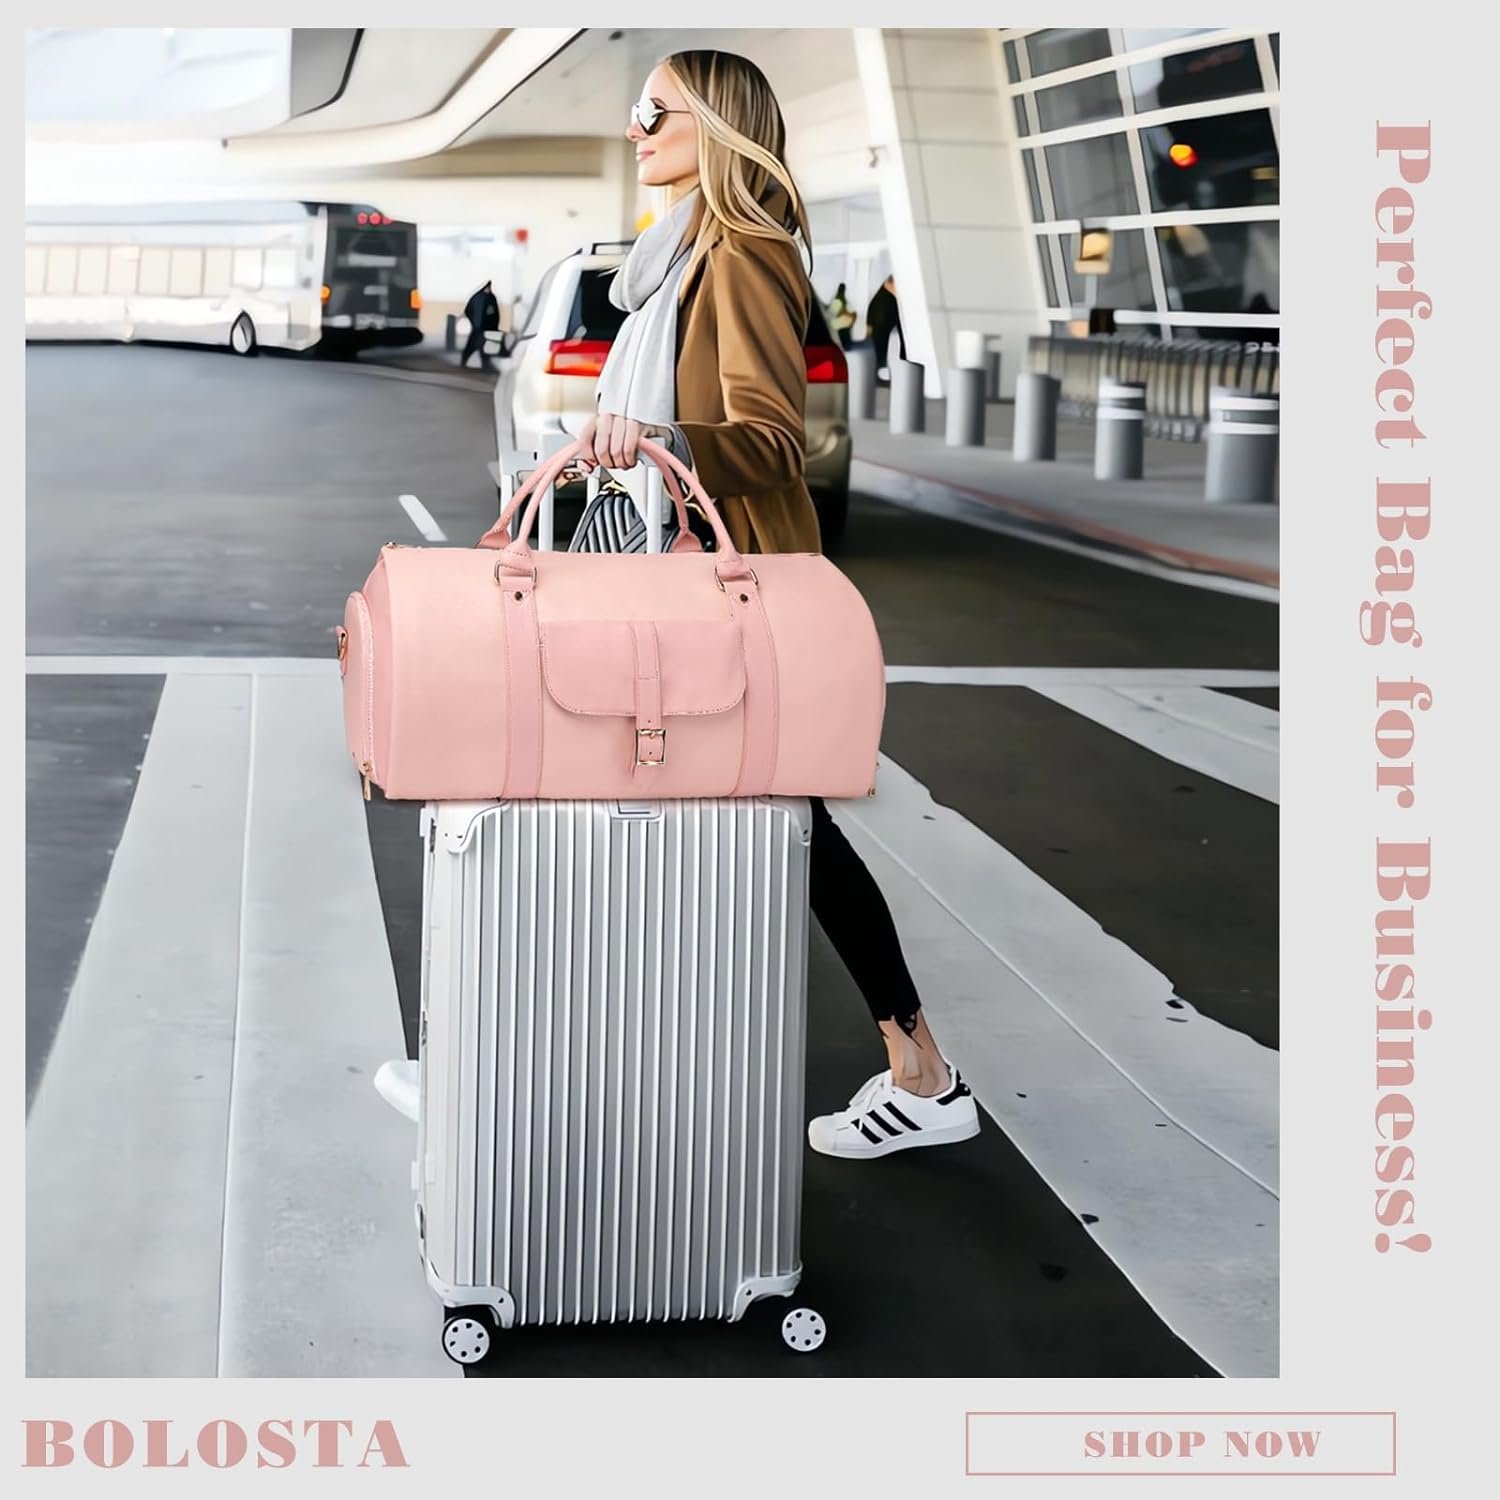 BOLOSTA Carry On Garment Bag for Women Convertible Garment Duffle Bag for Hanging Clothes Long Dresses PU Leather Travel Weekender Overnight Bag with Shoe Compartment